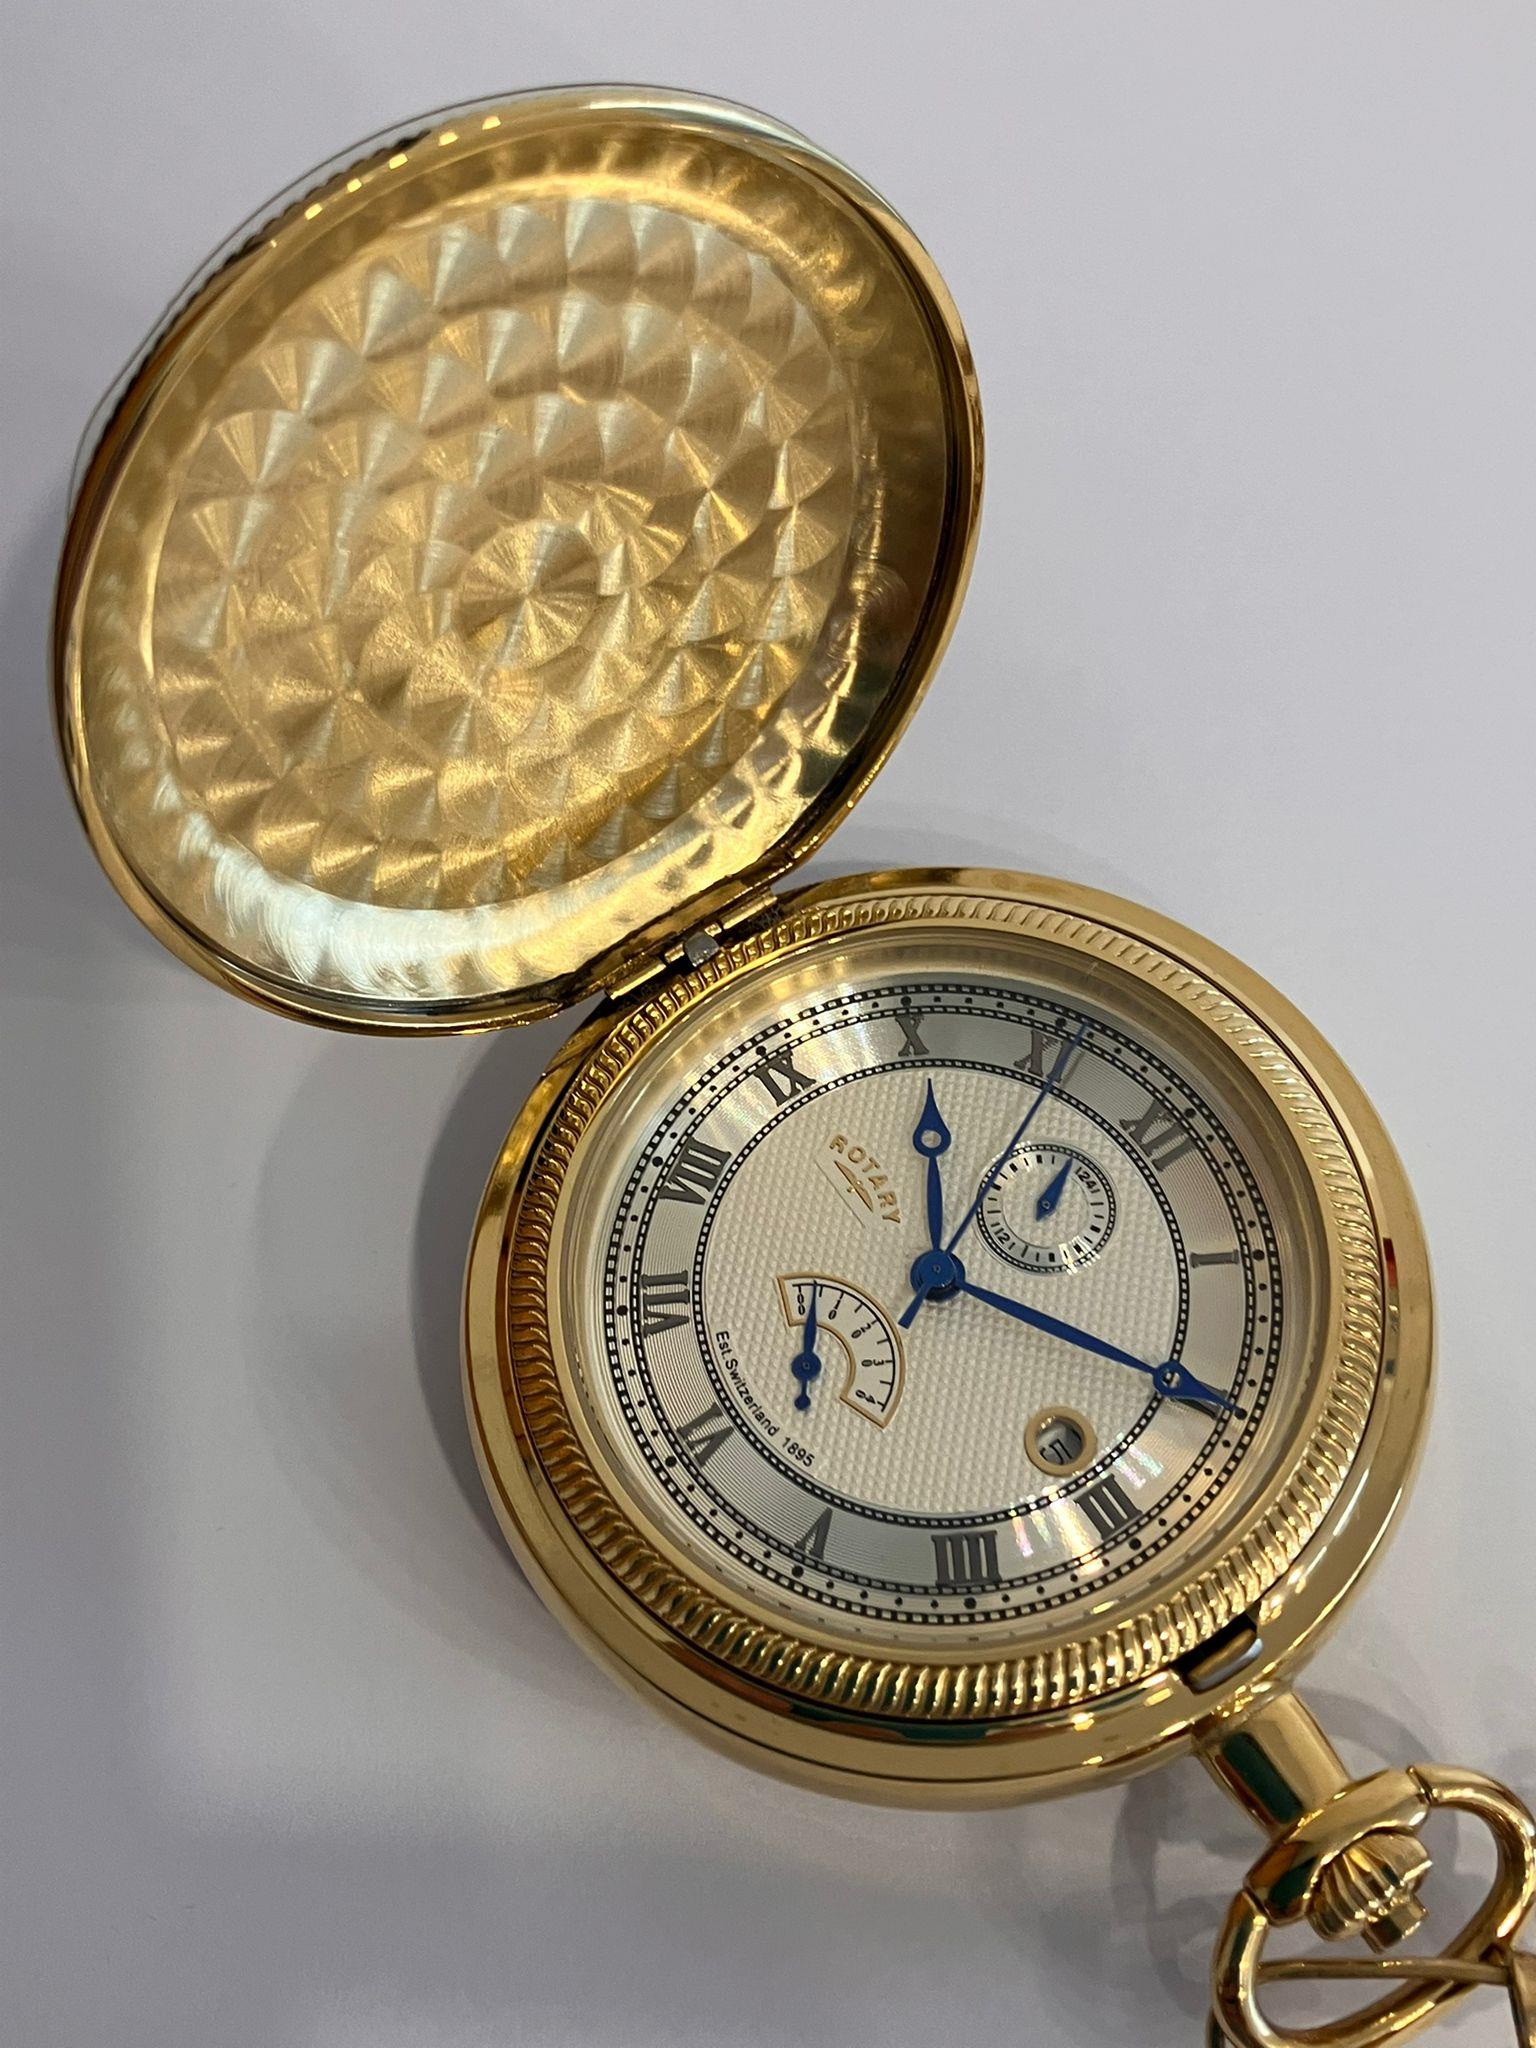 Gentlemans ROTARY GOLD PLATED FULL HUNTER POCKET WATCH & CHAIN. Hand wind/automatic. Gold plated